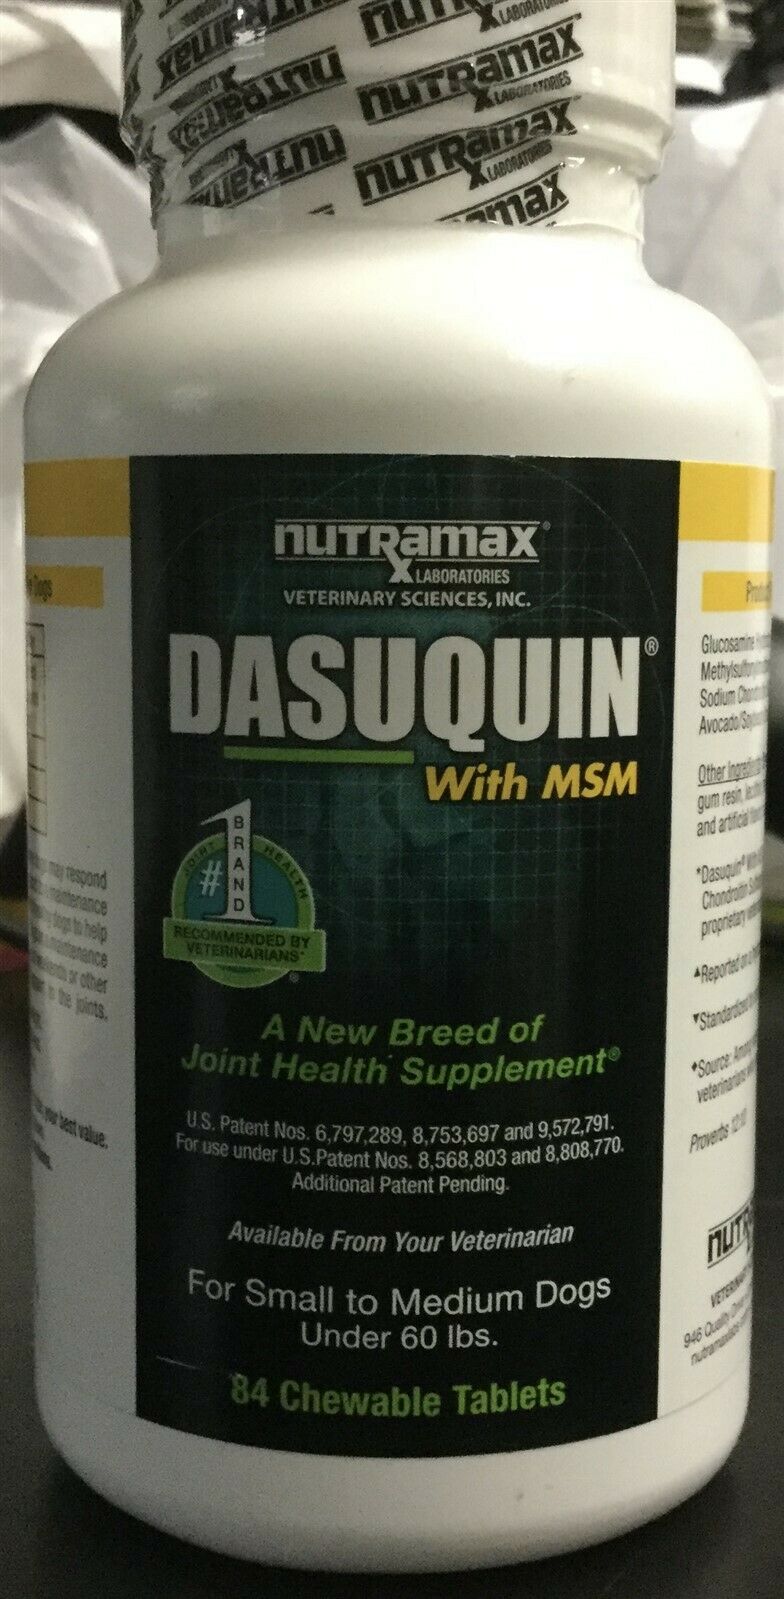 Dasuquin Msm For Small To Medium Dogs (84 Chewable Tablets), 05/2023 #0217